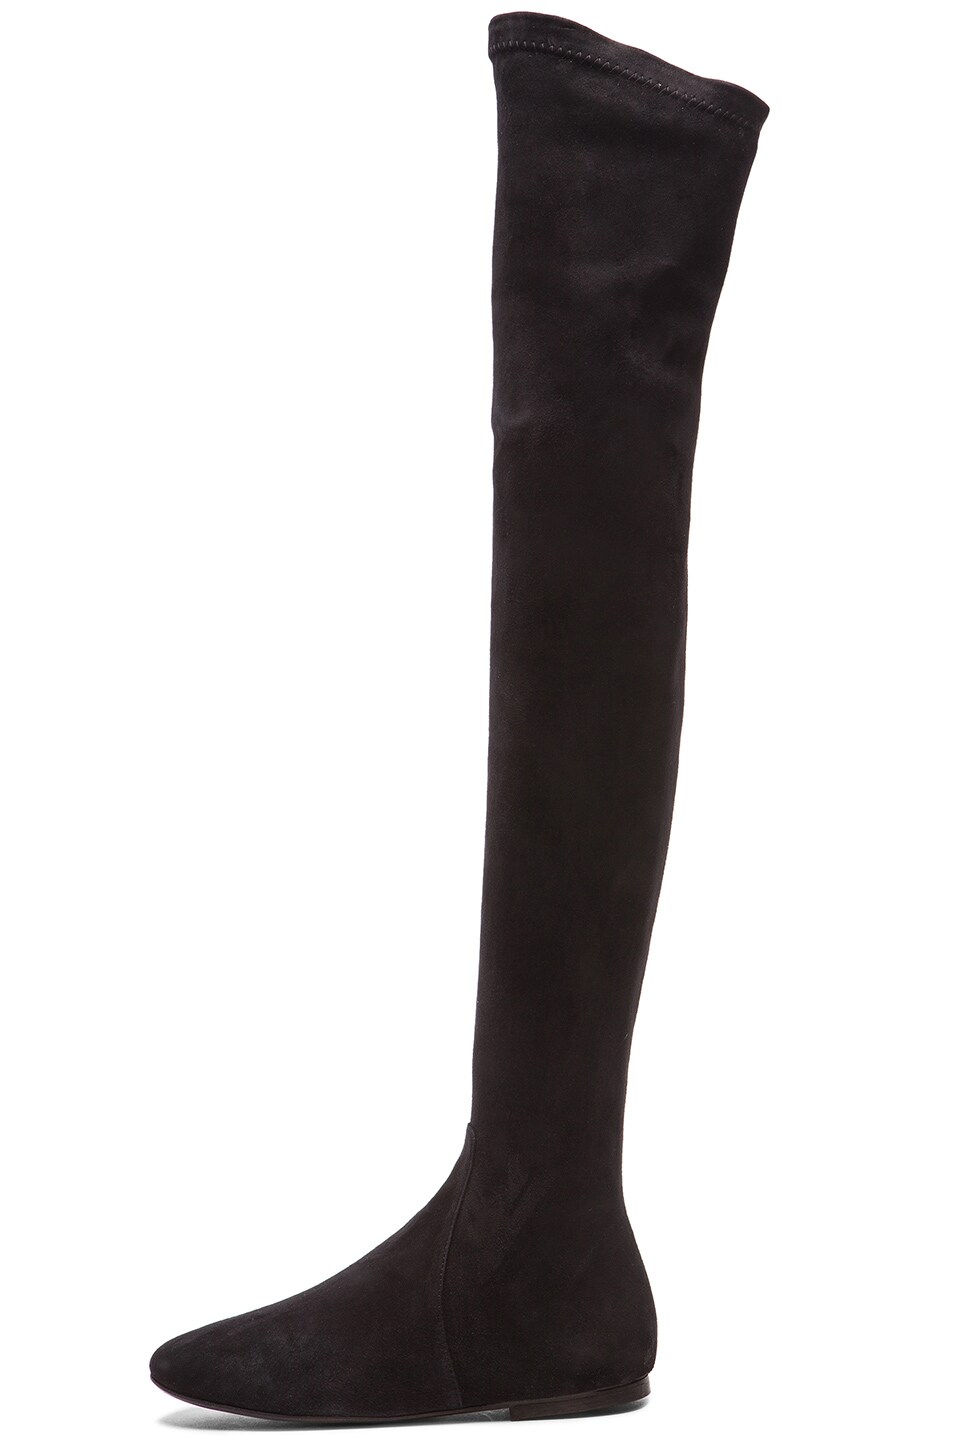 Isabel Marant Etoile Brenna Over the Knee Suede Boots in Black | FWRD